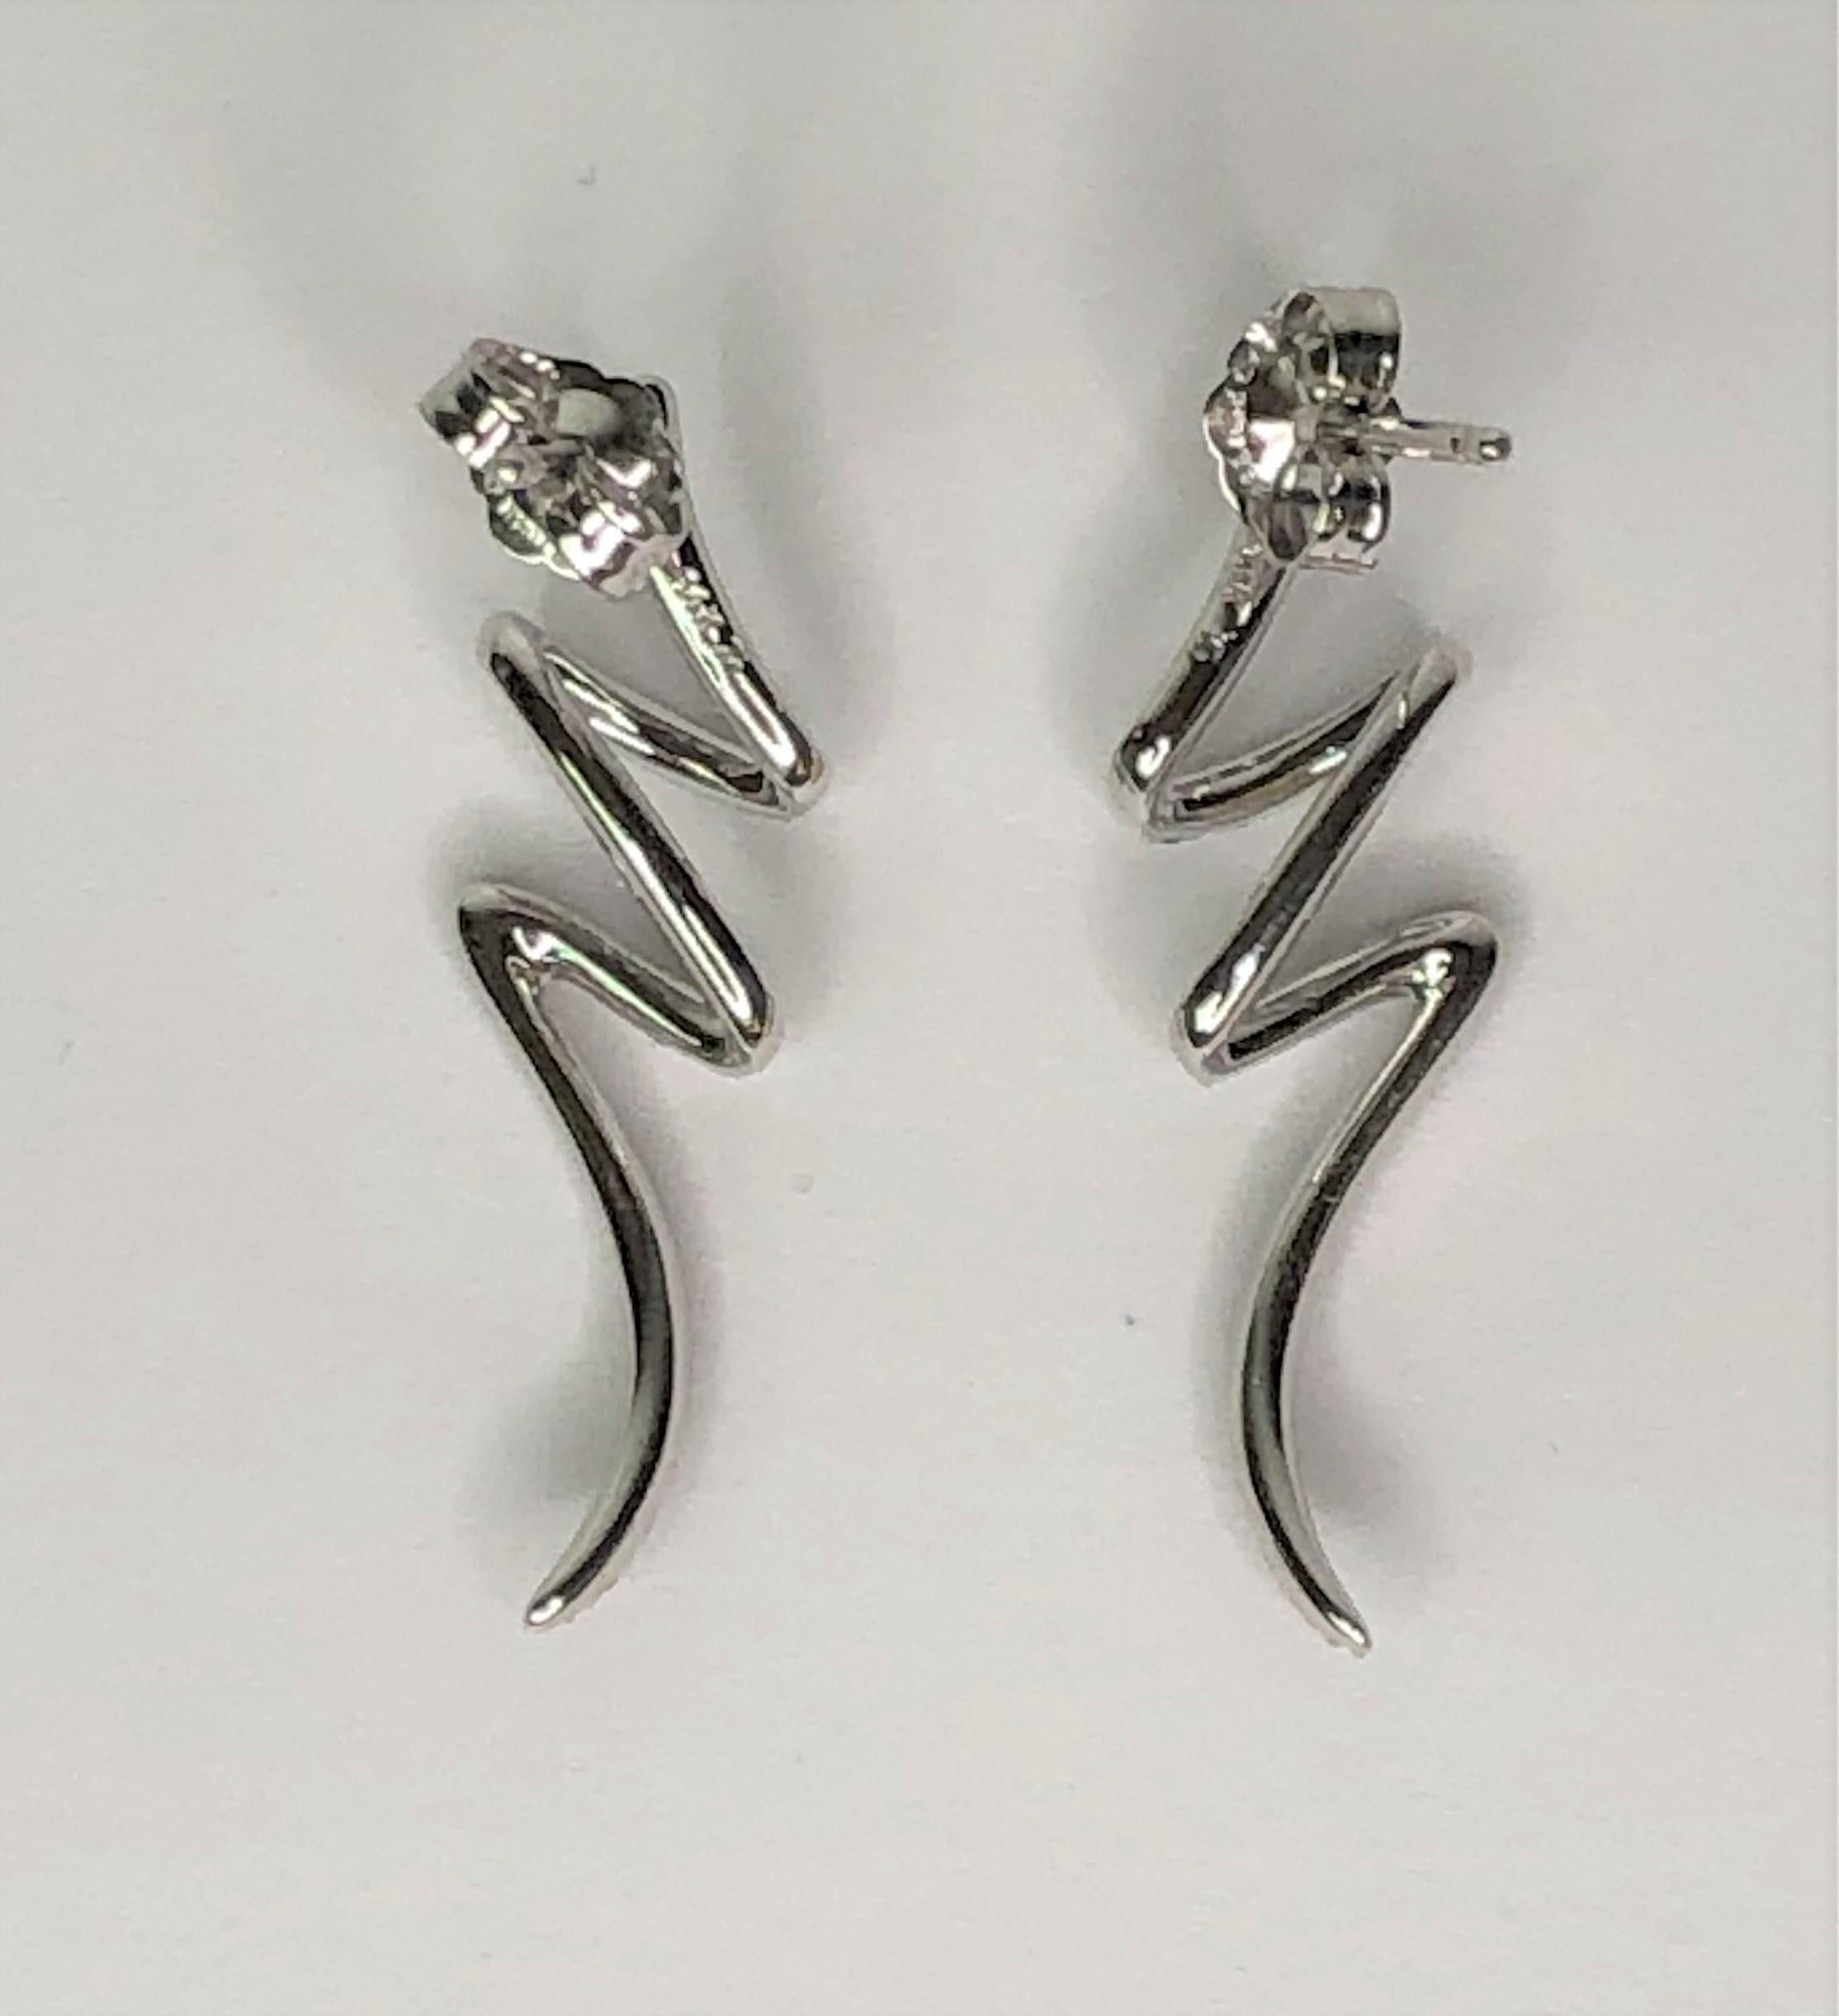 These fun earrings will make everyone smile!!  
14 karat white gold squiggle design lined with diamonds. 
Total of 33 round cut diamonds on each earring.  
.33 total diamond weight
Easy to wear!
Post with friction back.
Stamped 